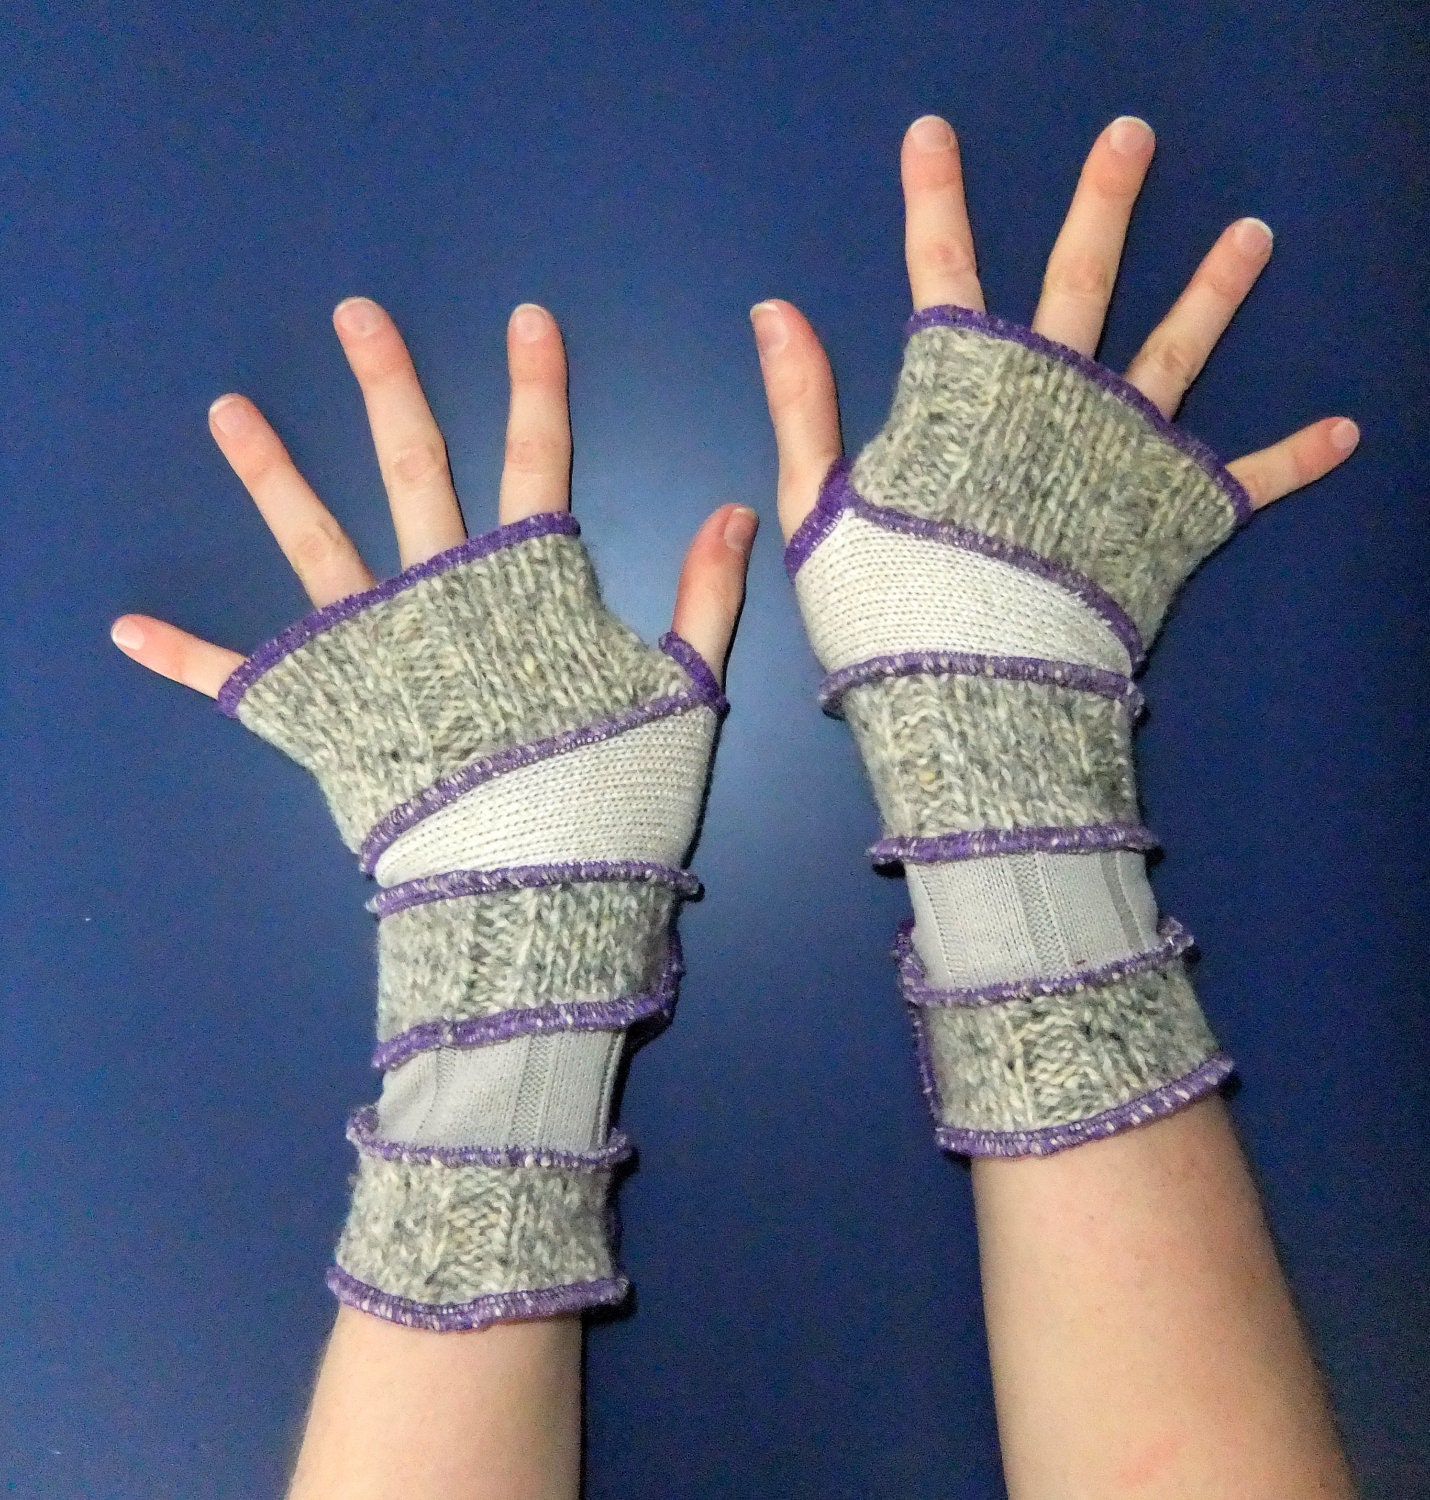 Fingerless Gloves - Arm warmers - One size - Ready To Ship